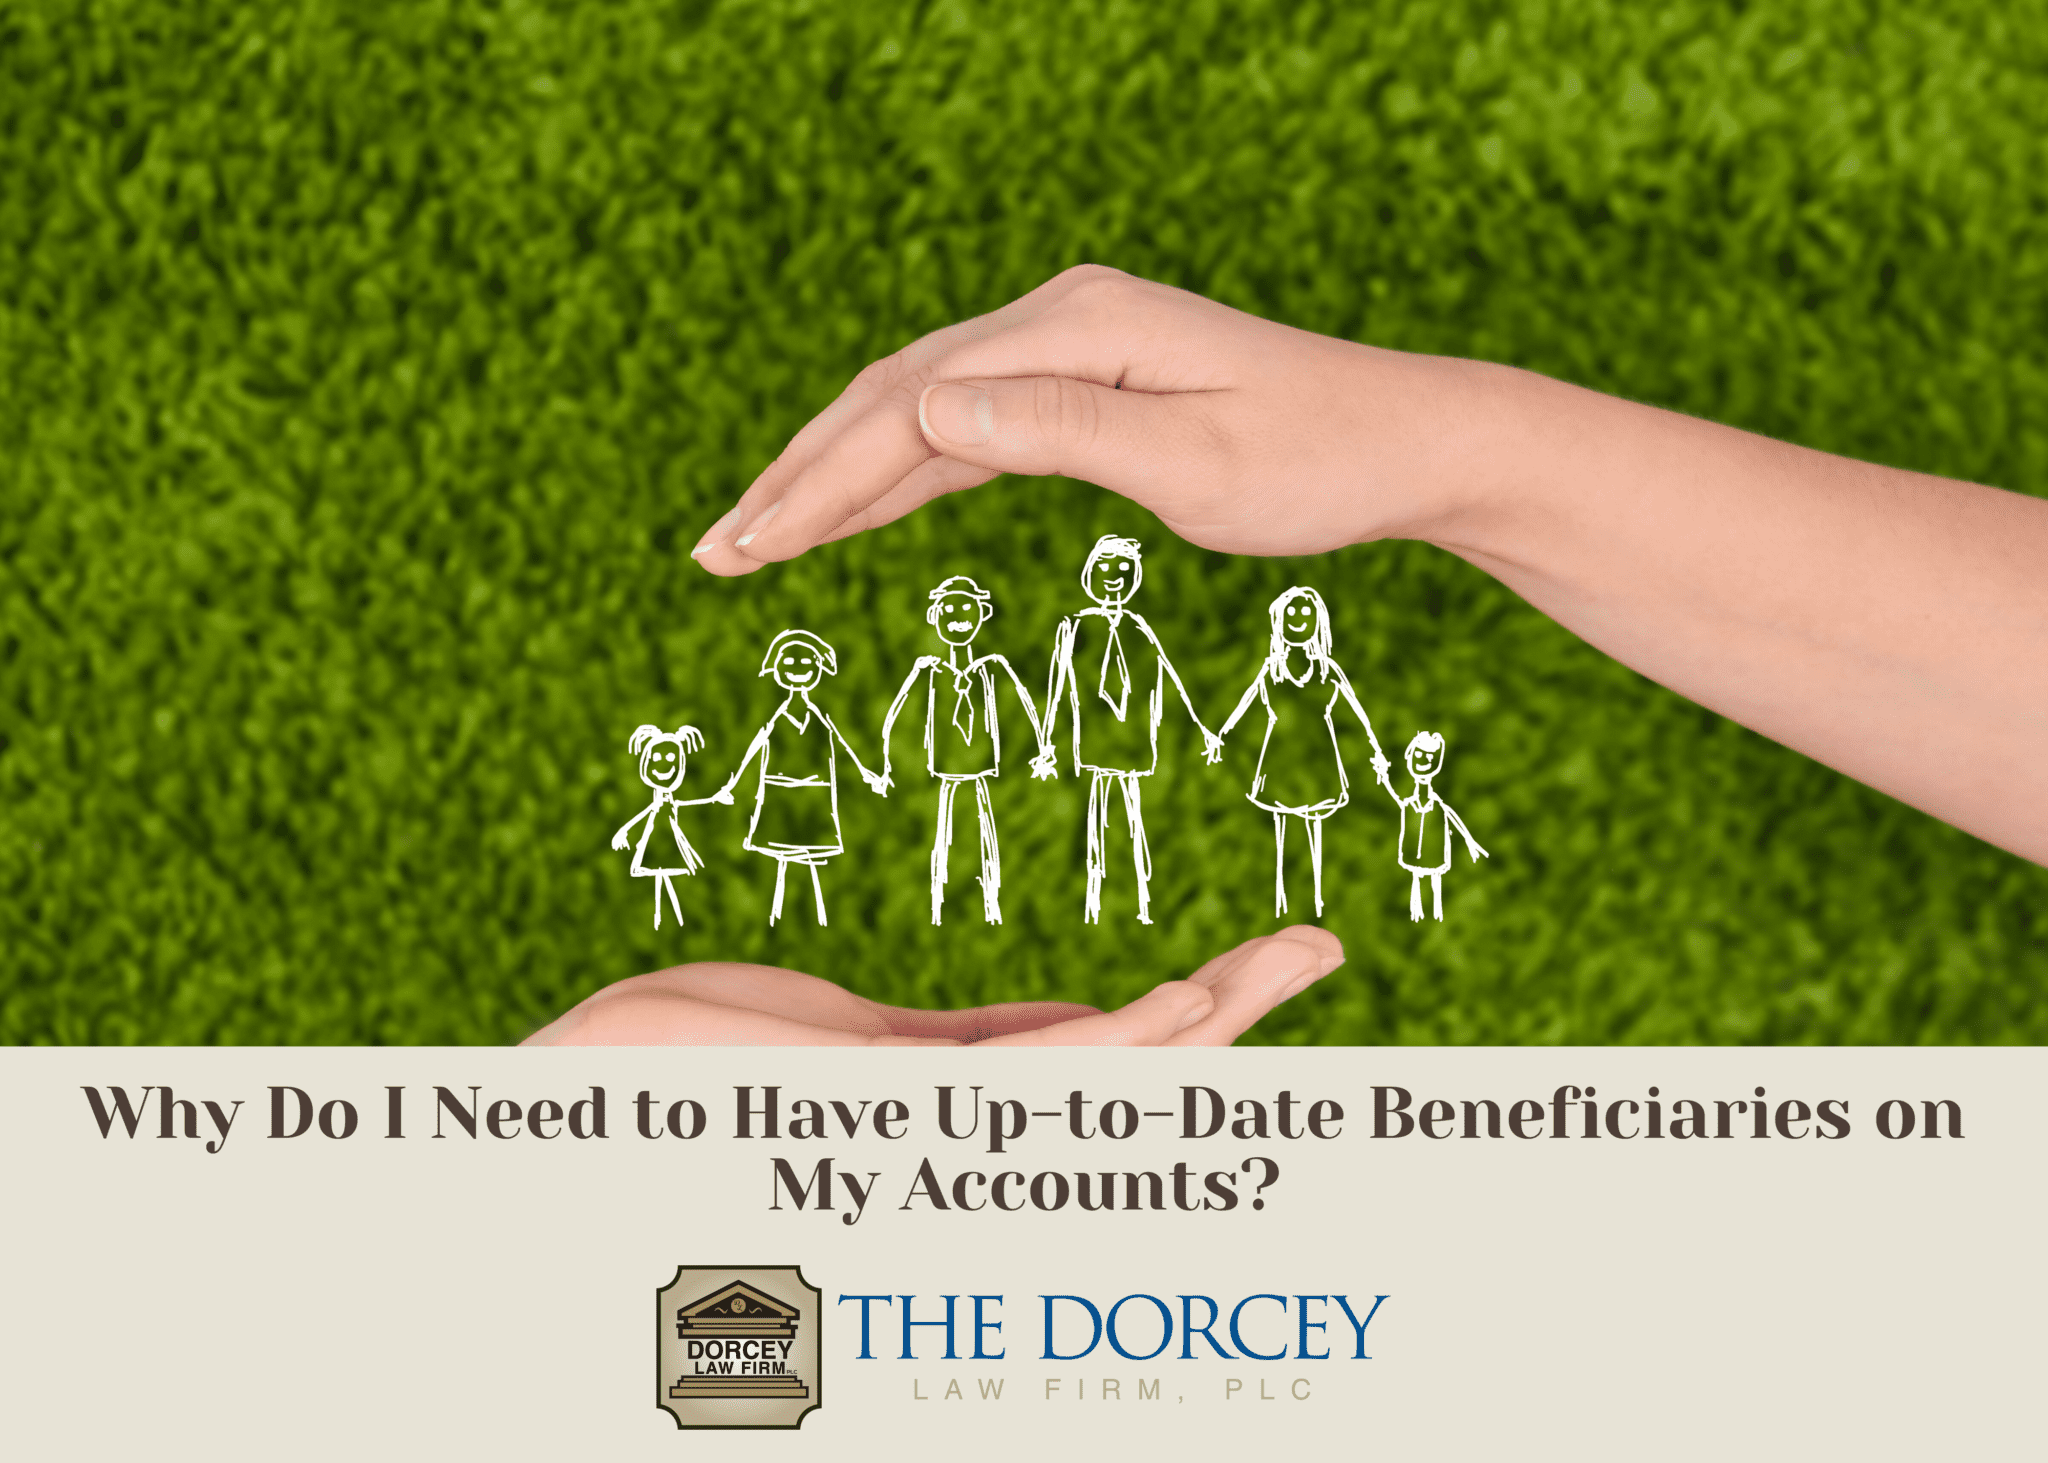 Why Do I Need to Have Up-To-Date Beneficiaries on My Accounts?